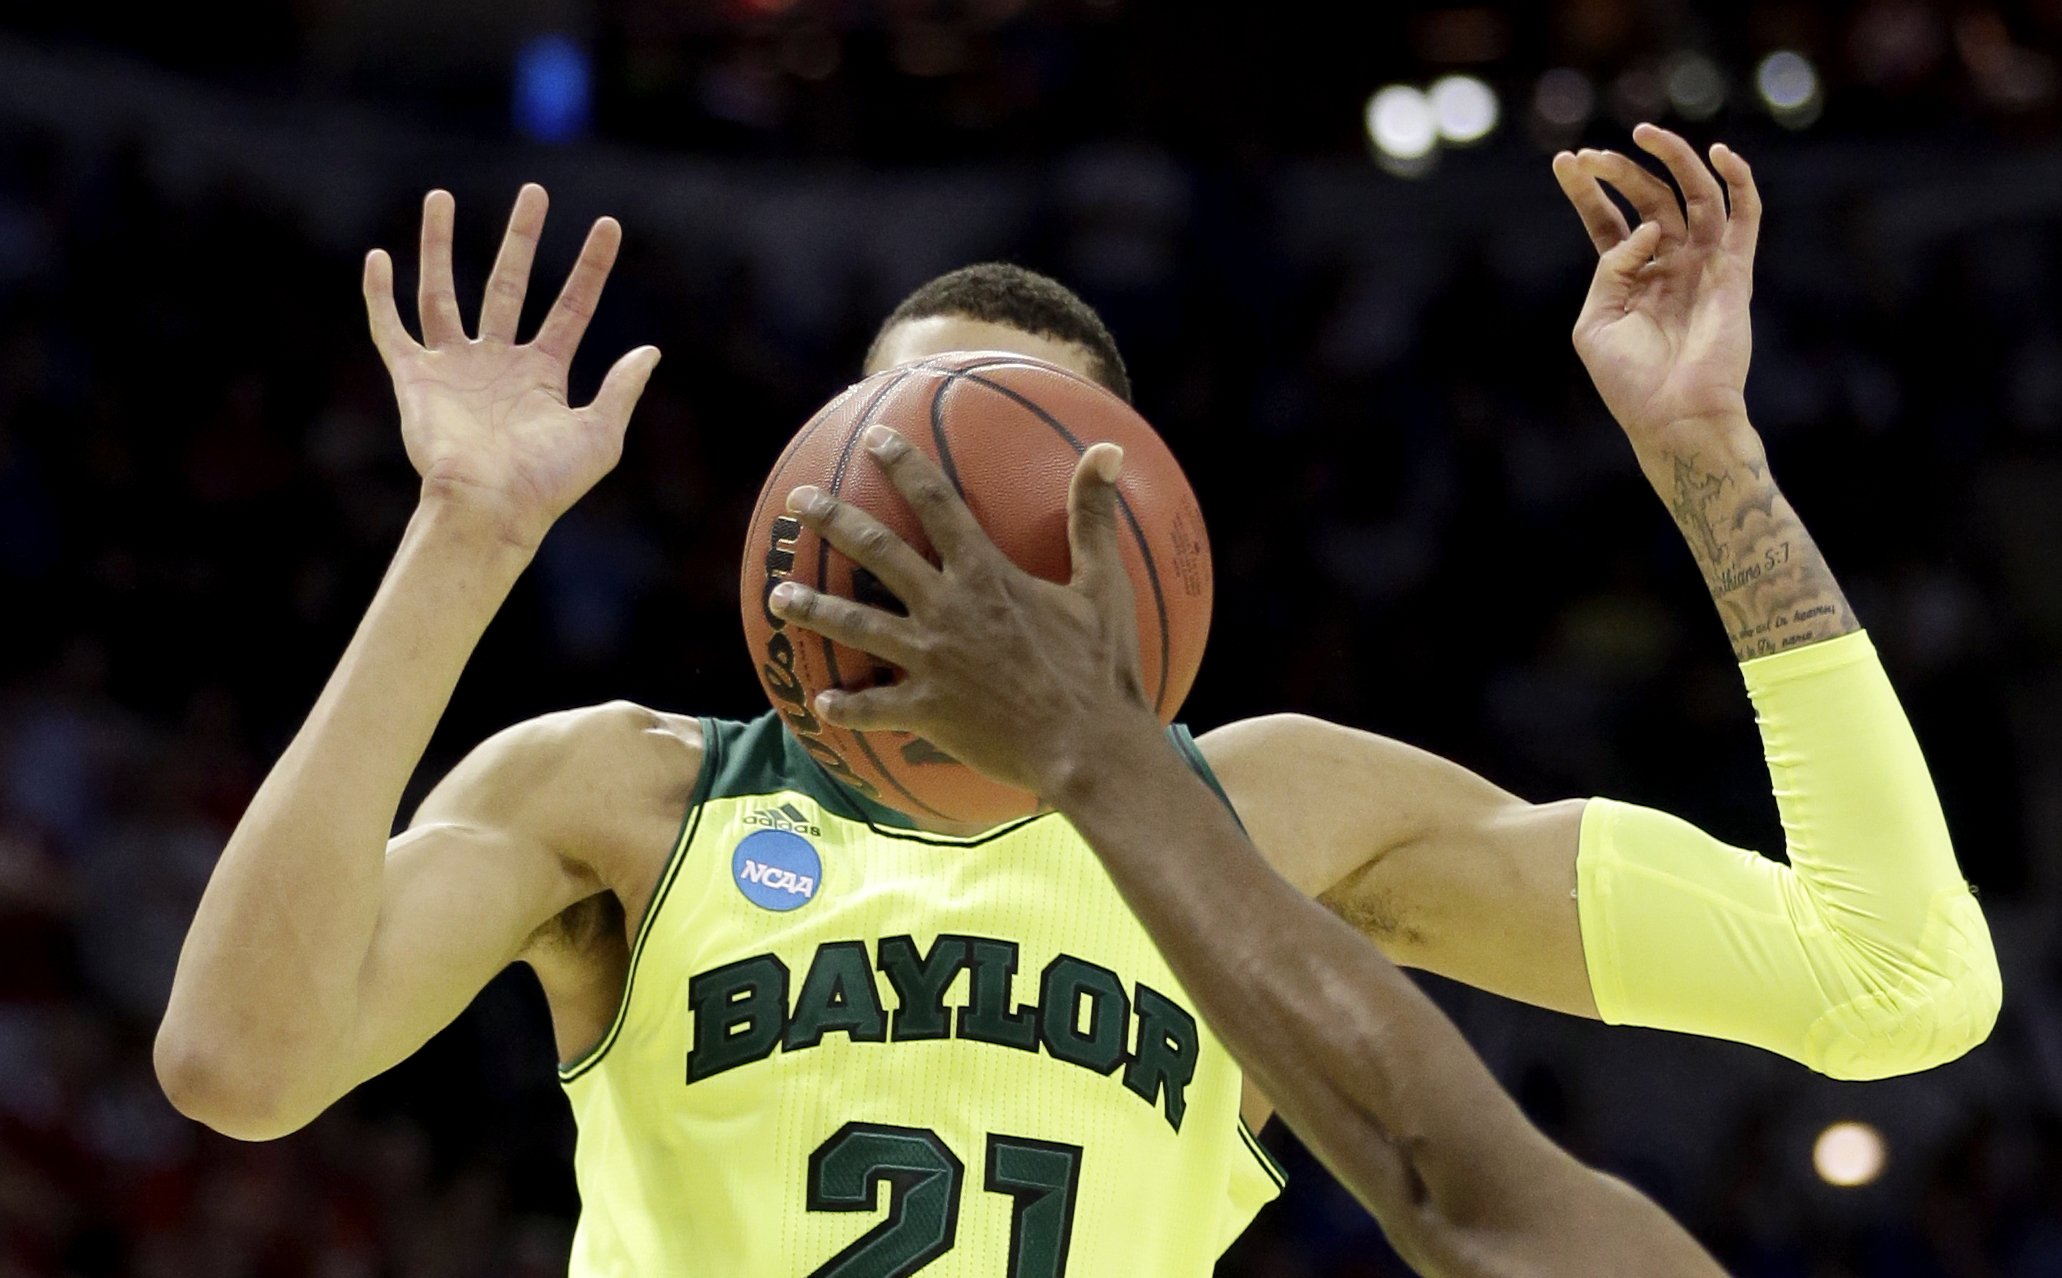 Baylor's Isaiah Austin has his face covered by the ball as Nebraska's Leslee Smith's arm reaches for the ball during the second half of a second-round game in the NCAA college basketball tournament, March 21, 2014, in San Antonio. Baylor won 74-60.